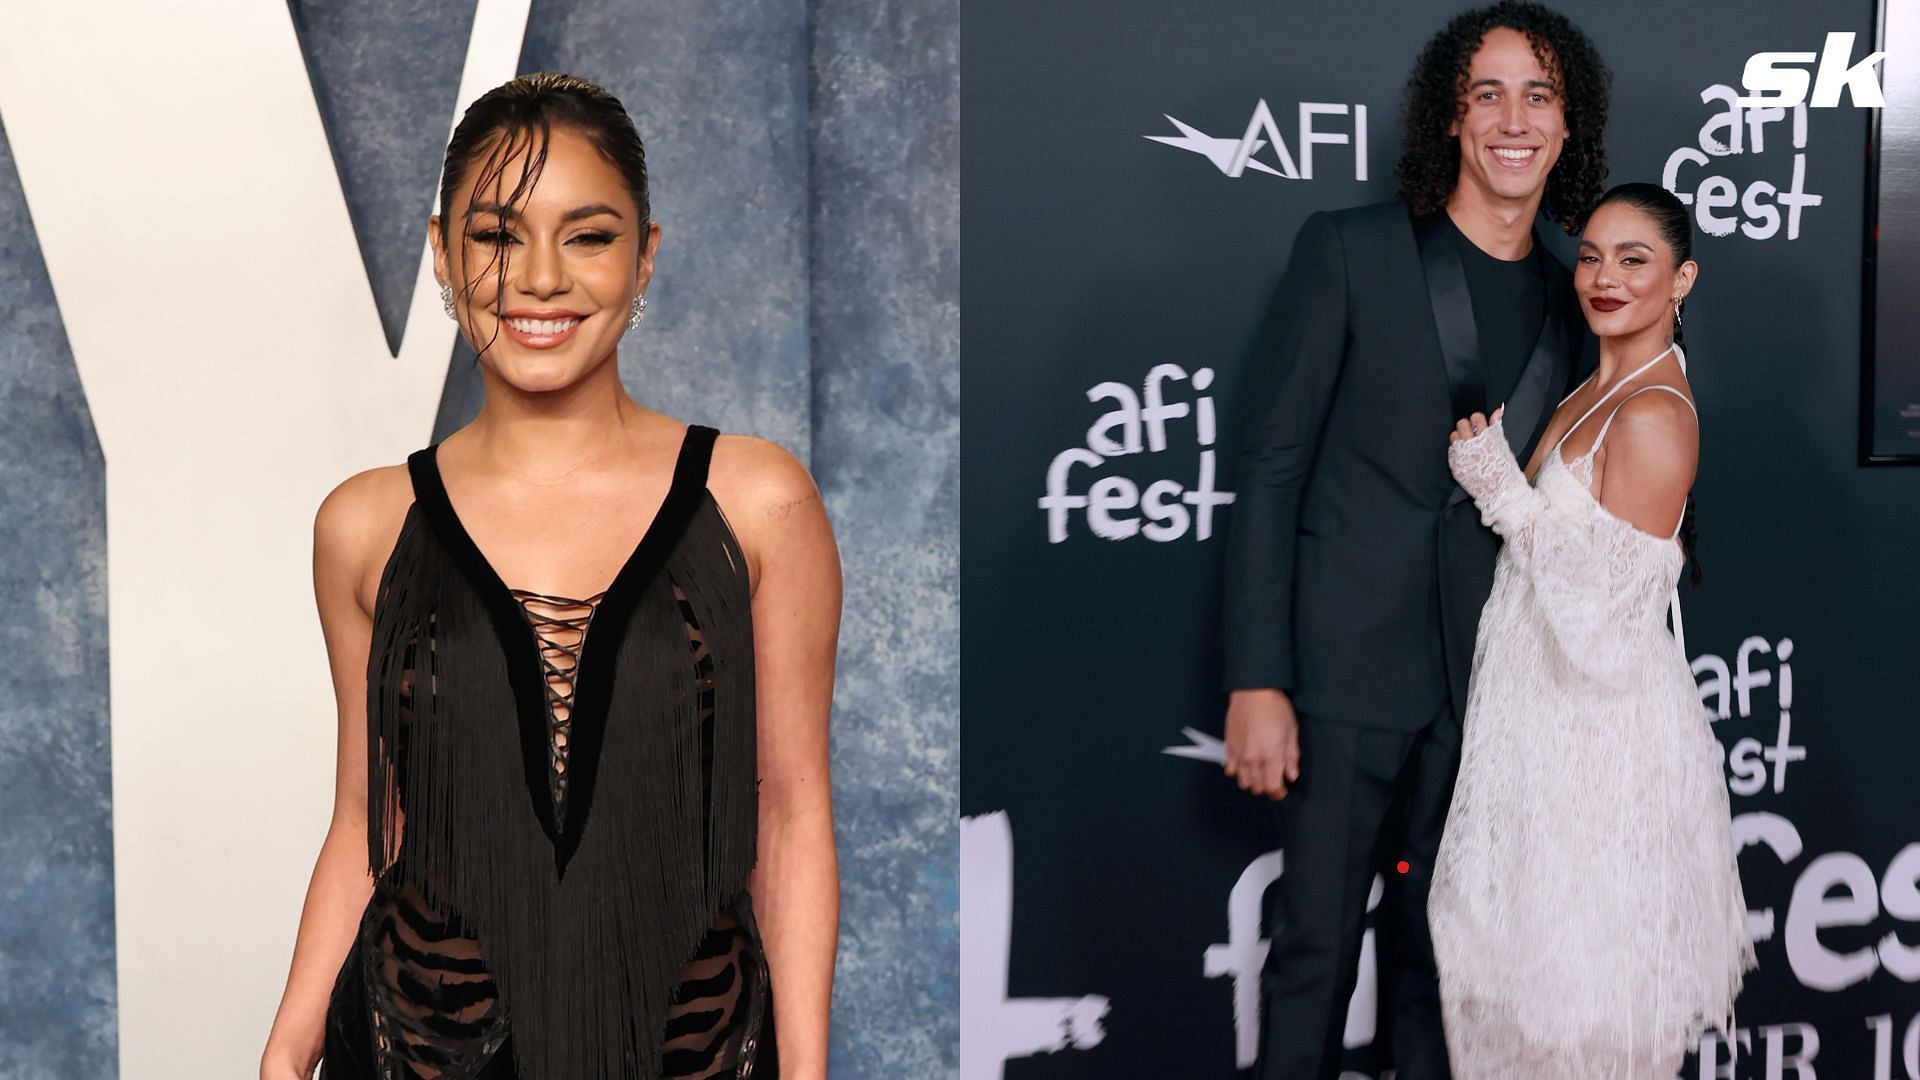 After releasing big news this spring, Vanessa Hudgens will sit out Coachella for the second straight year